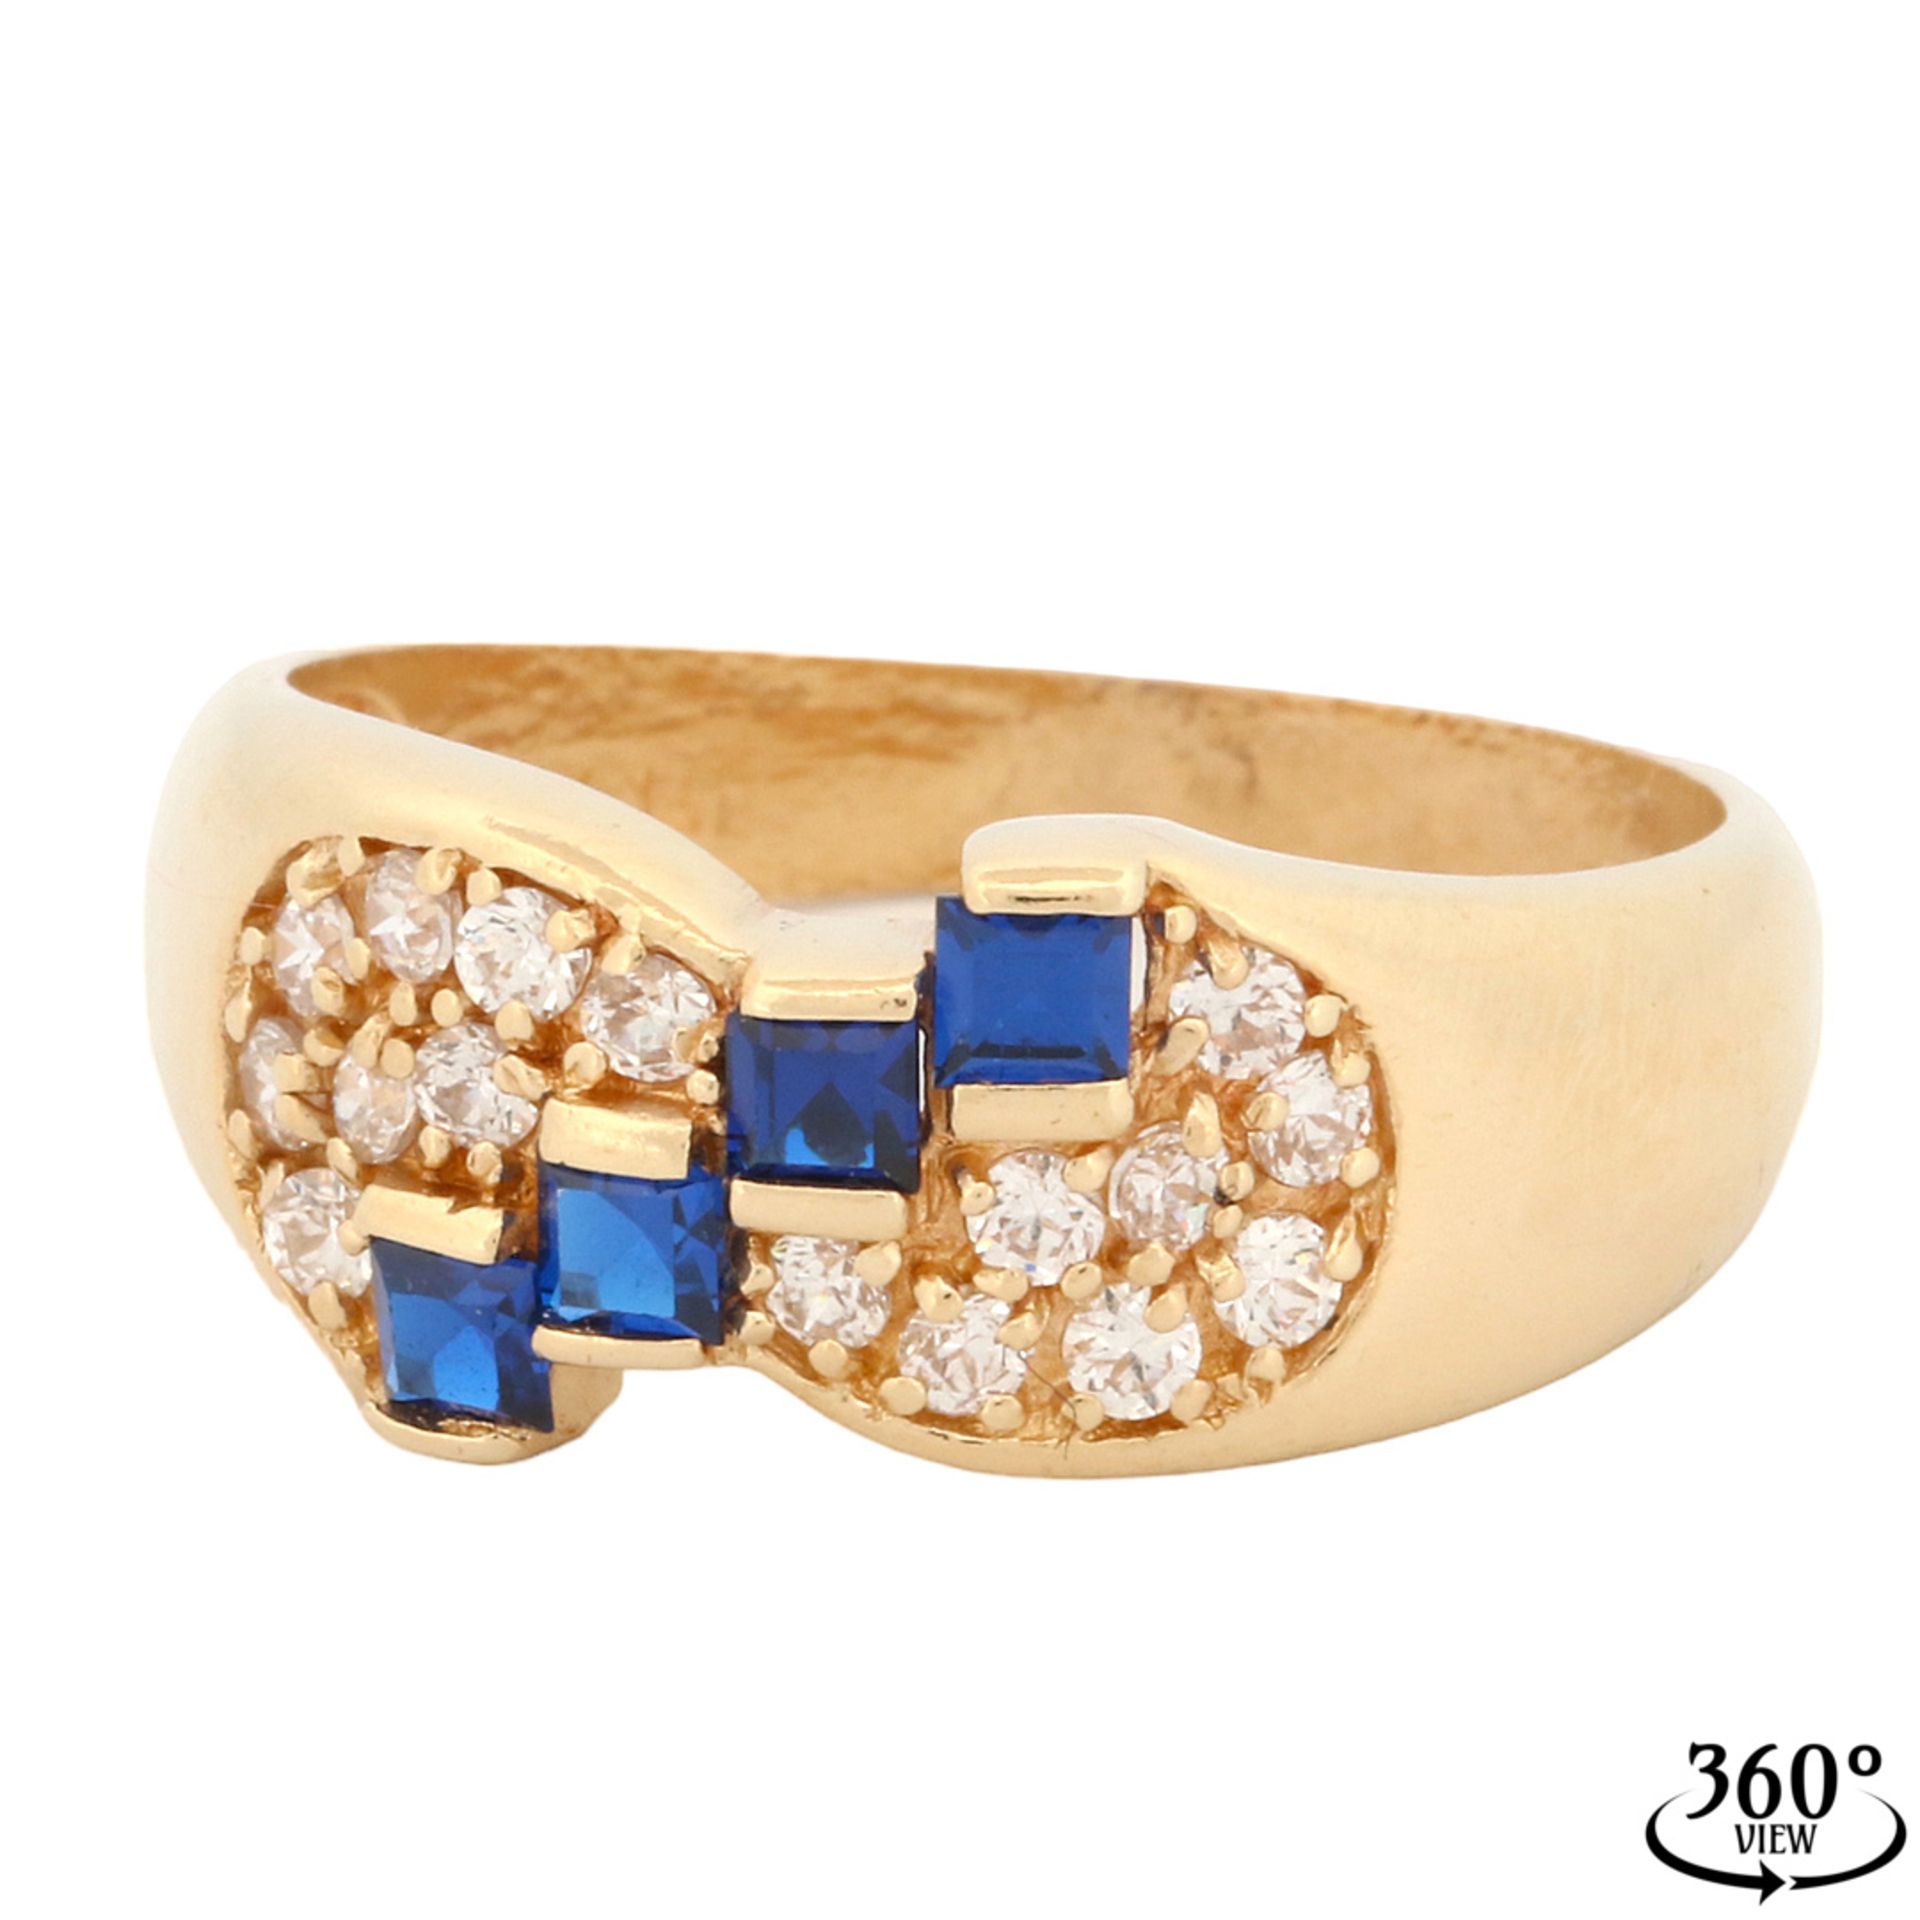 Modern gold ring with blue stones